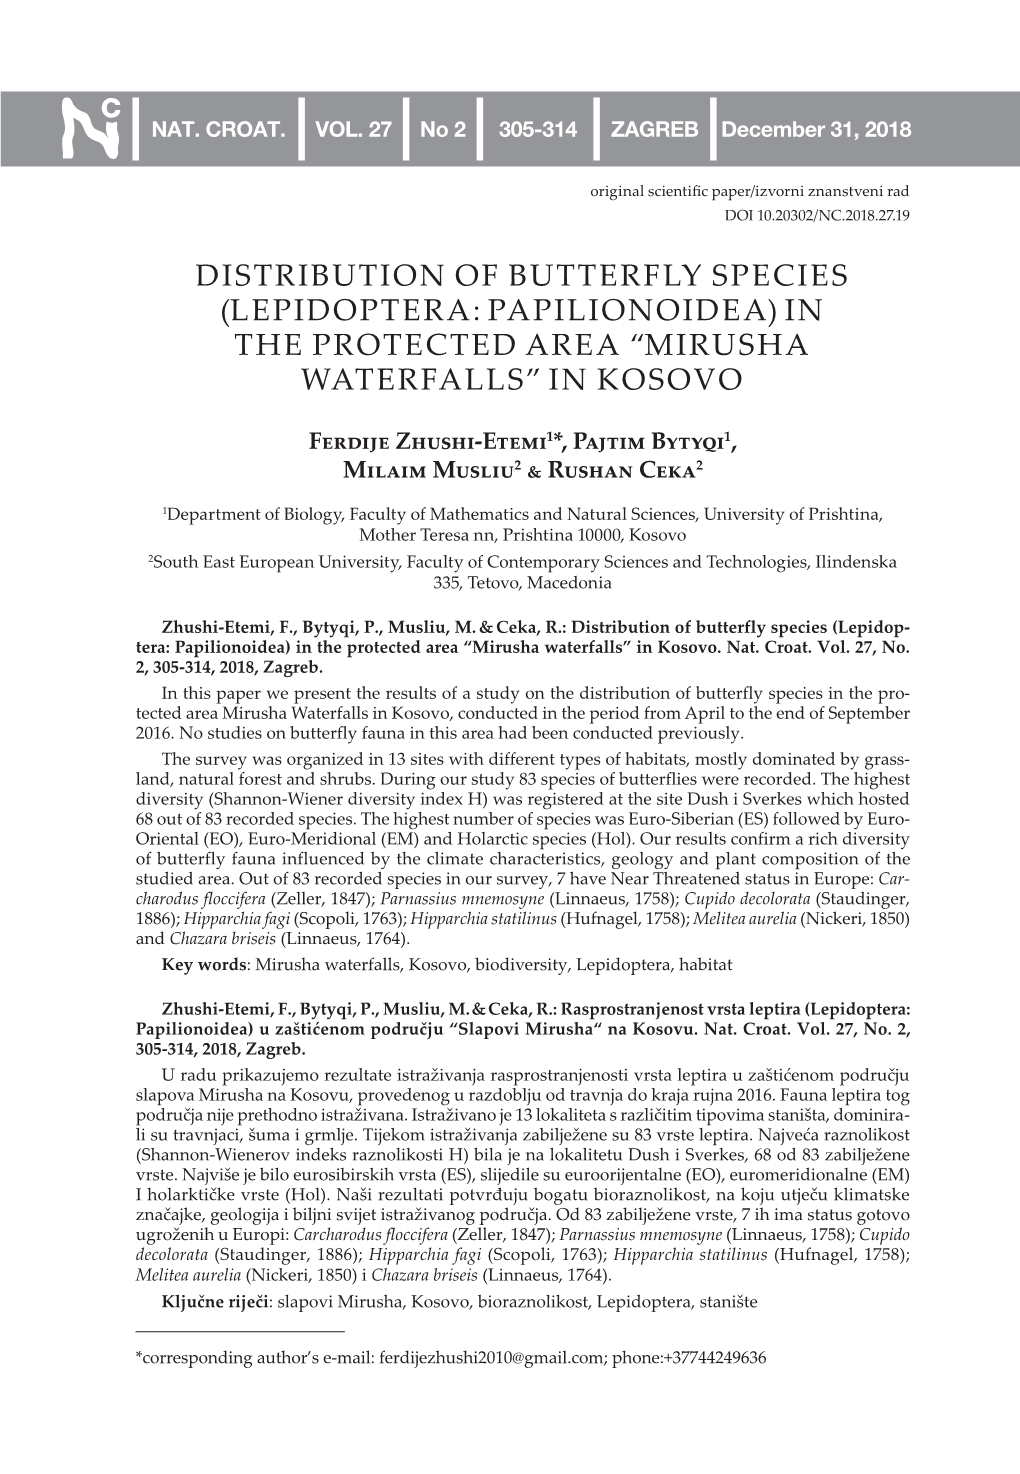 Distribution of Butterfly Species (Lepidoptera: Papilionoidea) in the Protected Area “Mirusha Waterfalls” in Kosovo